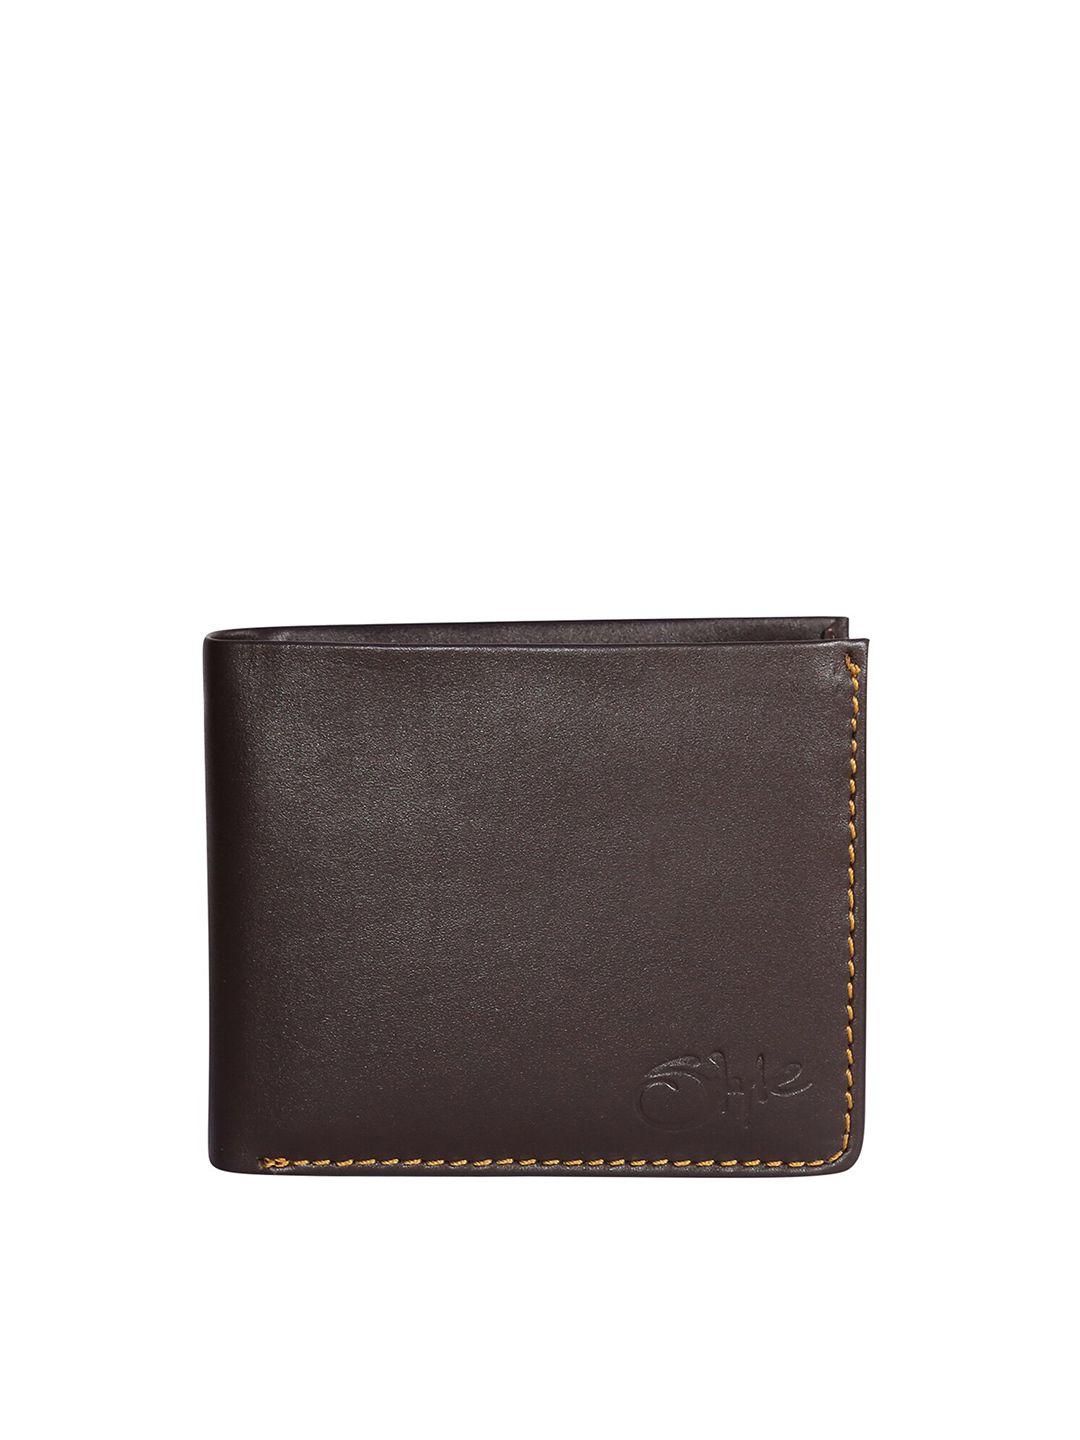 style shoes unisex brown leather rfid two fold wallet